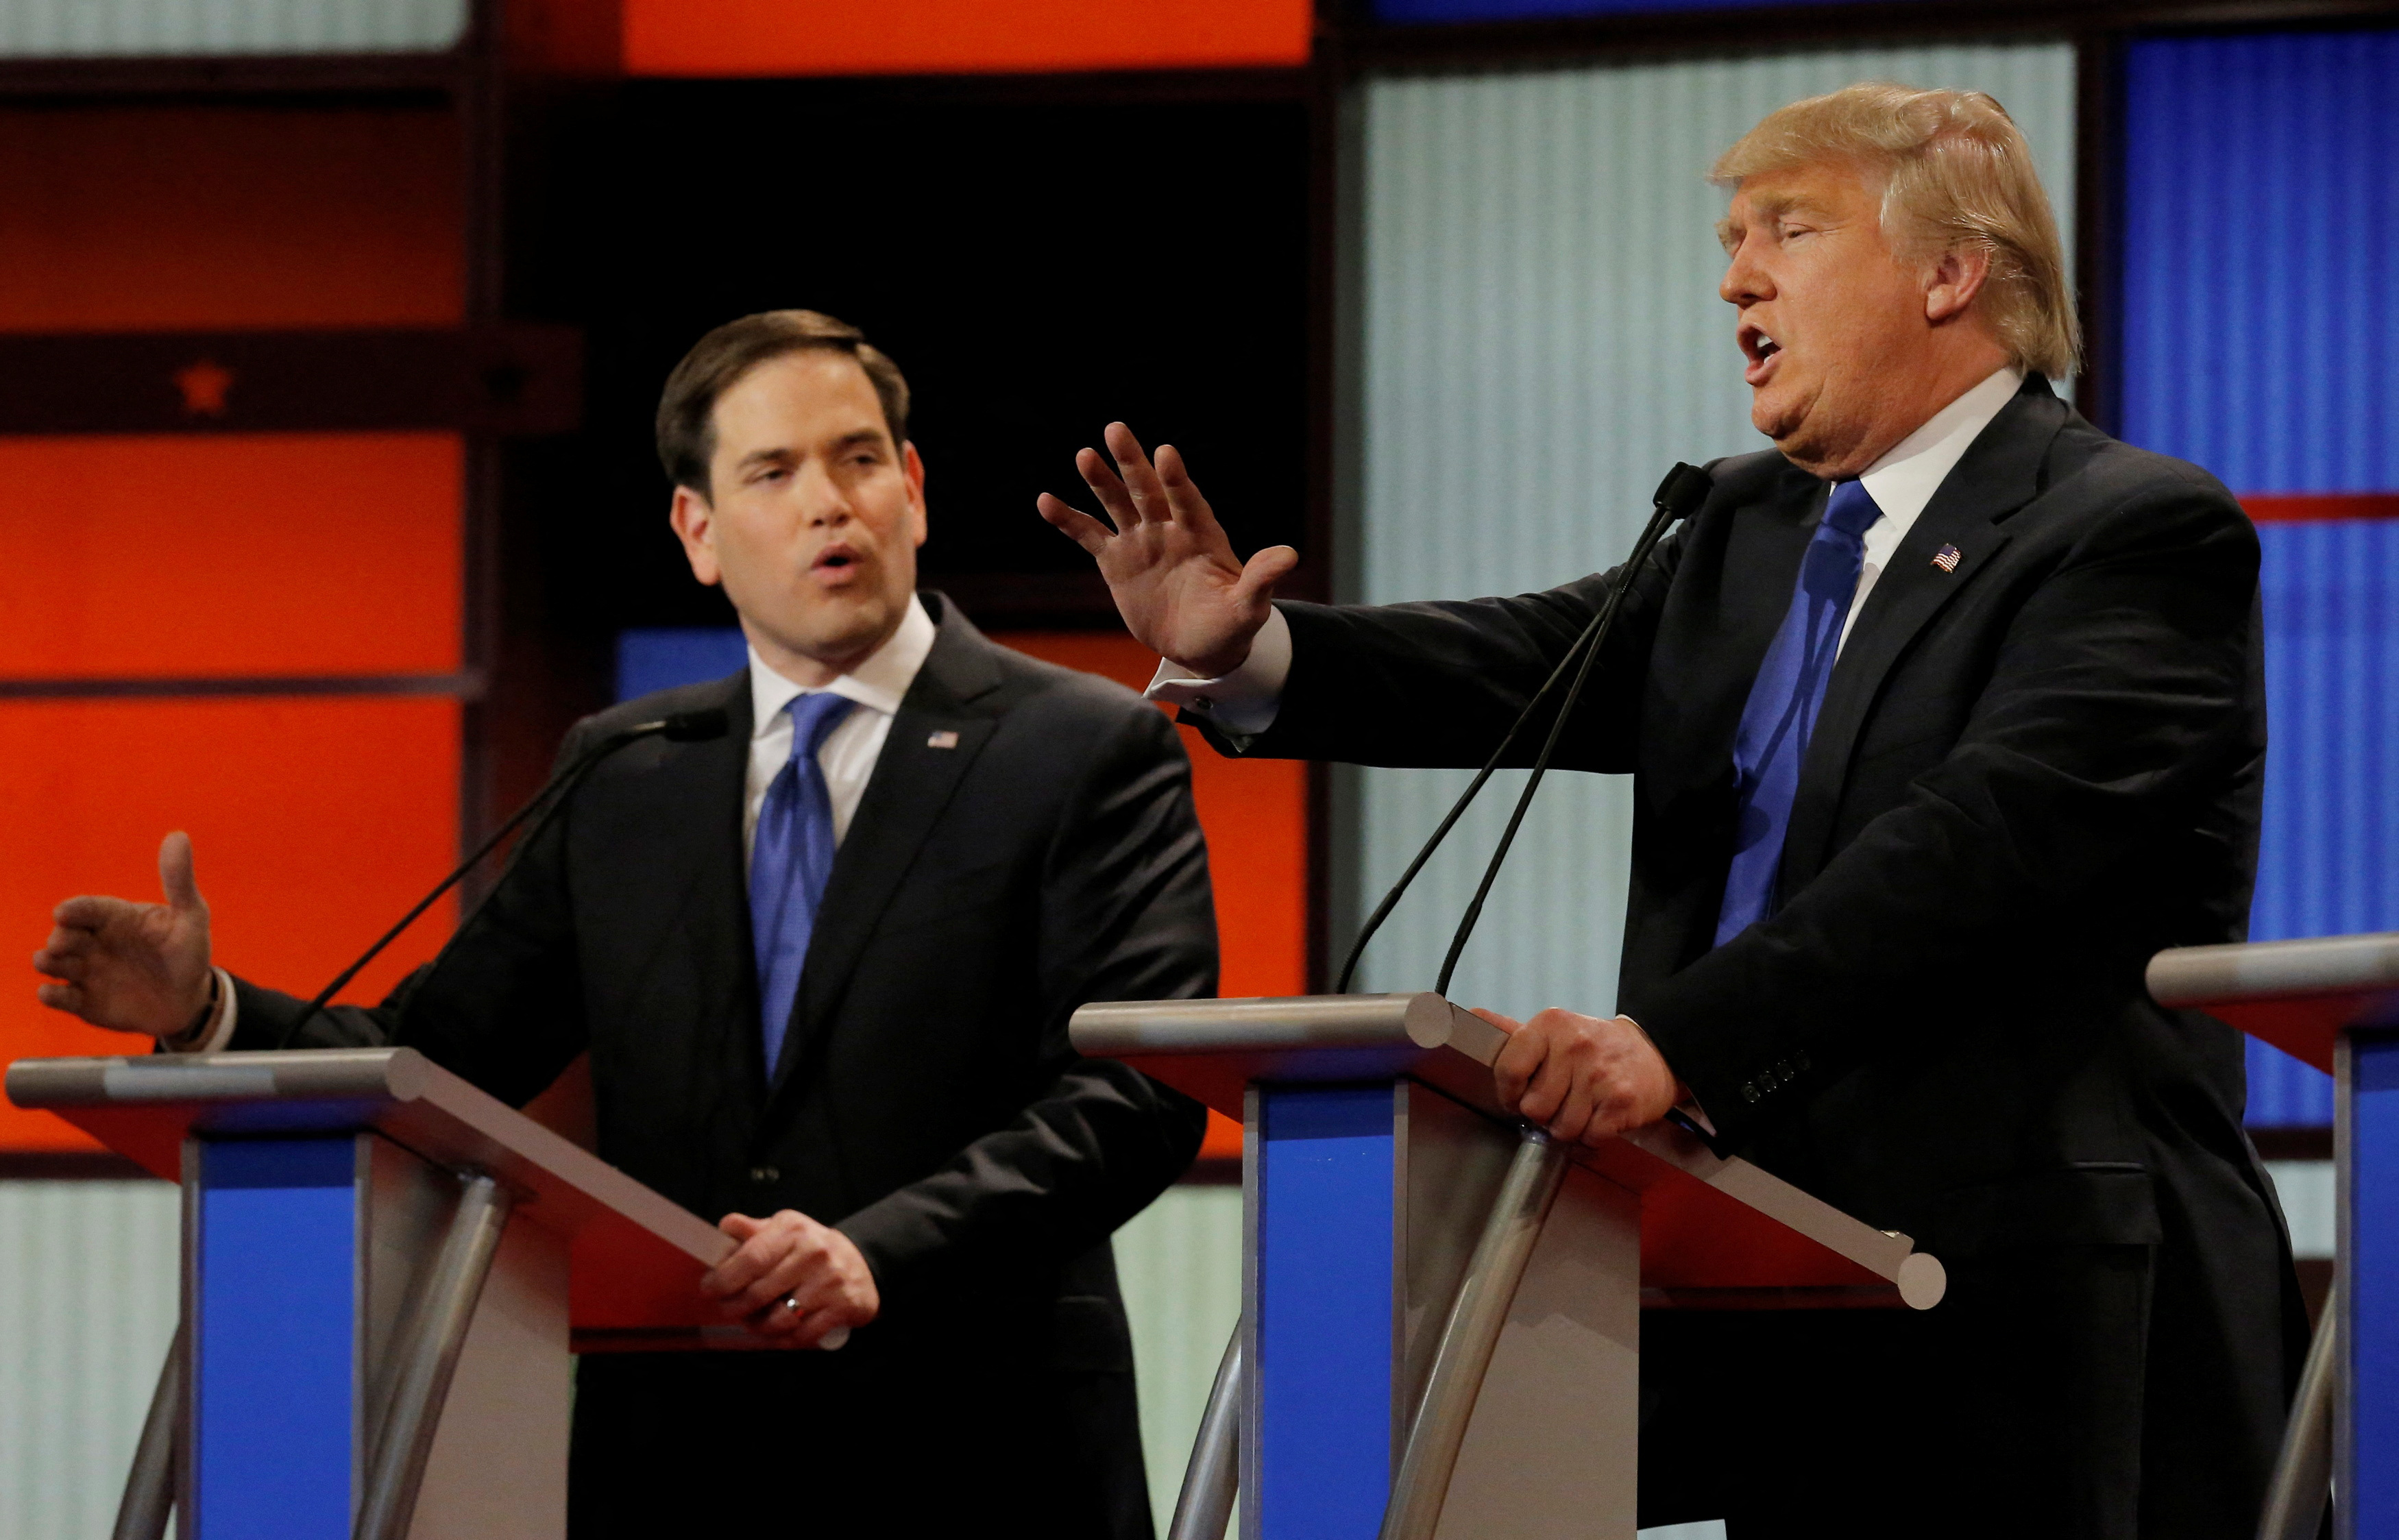 Republican U.S. presidential candidate Rubio and rival candidate Trump speak simultaneously at the U.S. Republican presidential candidates debate in Detroit